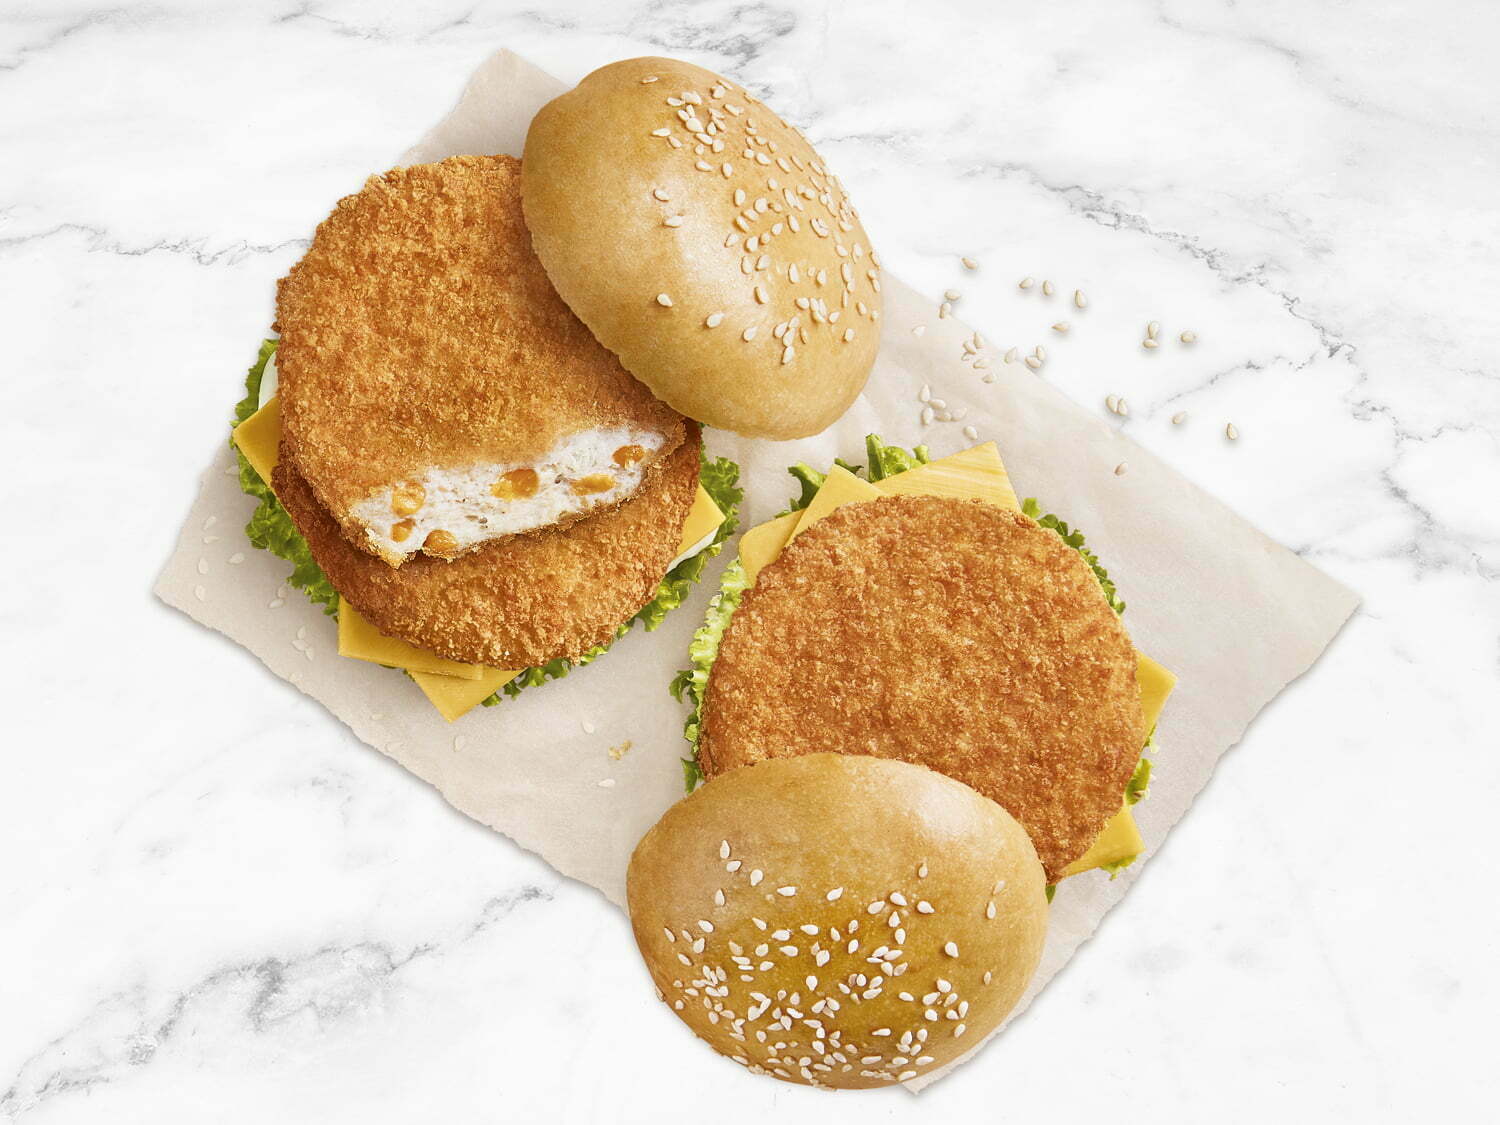 CHICKEN BURGERS WITH CHEESE